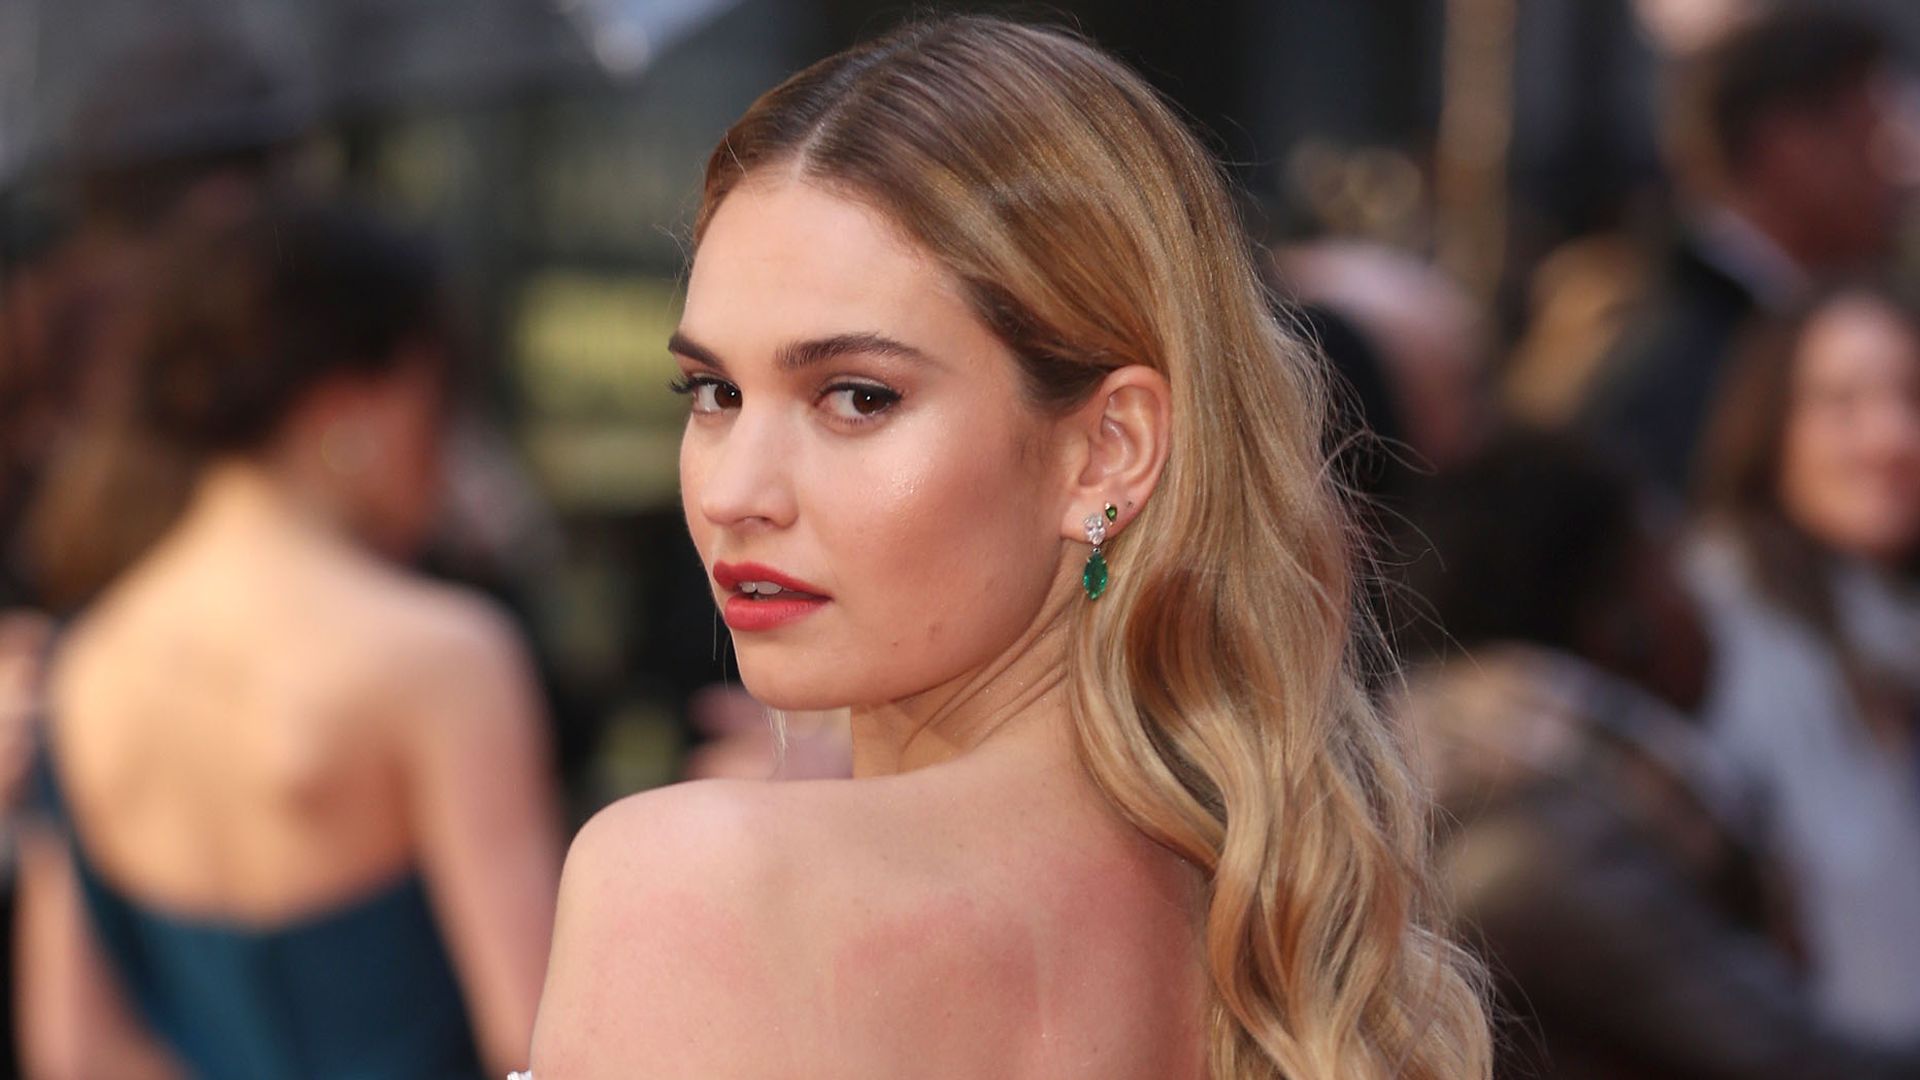 Lily James attends 'The Guernsey Literary And Potato Peel Pie Society' World Premiere at The Curzon Mayfair on April 9, 2018 in London, England.  (Photo by Mike Marsland/Mike Marsland/WireImage)